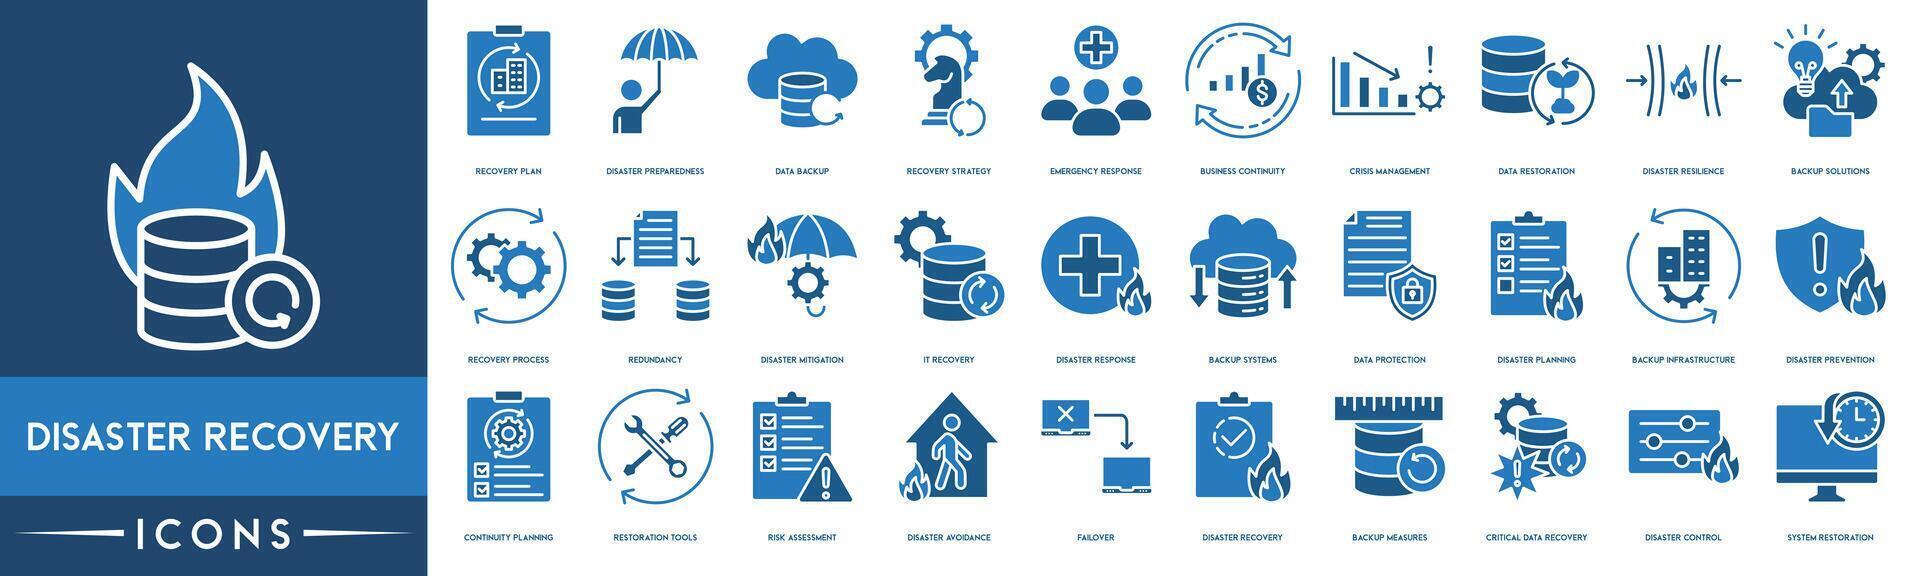 Disaster Recovery icon. Recovery Plan, Disaster Preparedness, Data Backup, Recovery Strategy, Business Continuity, Crisis Management, Data Restoration, Disaster Resilience and Backup Solutions icon. vector